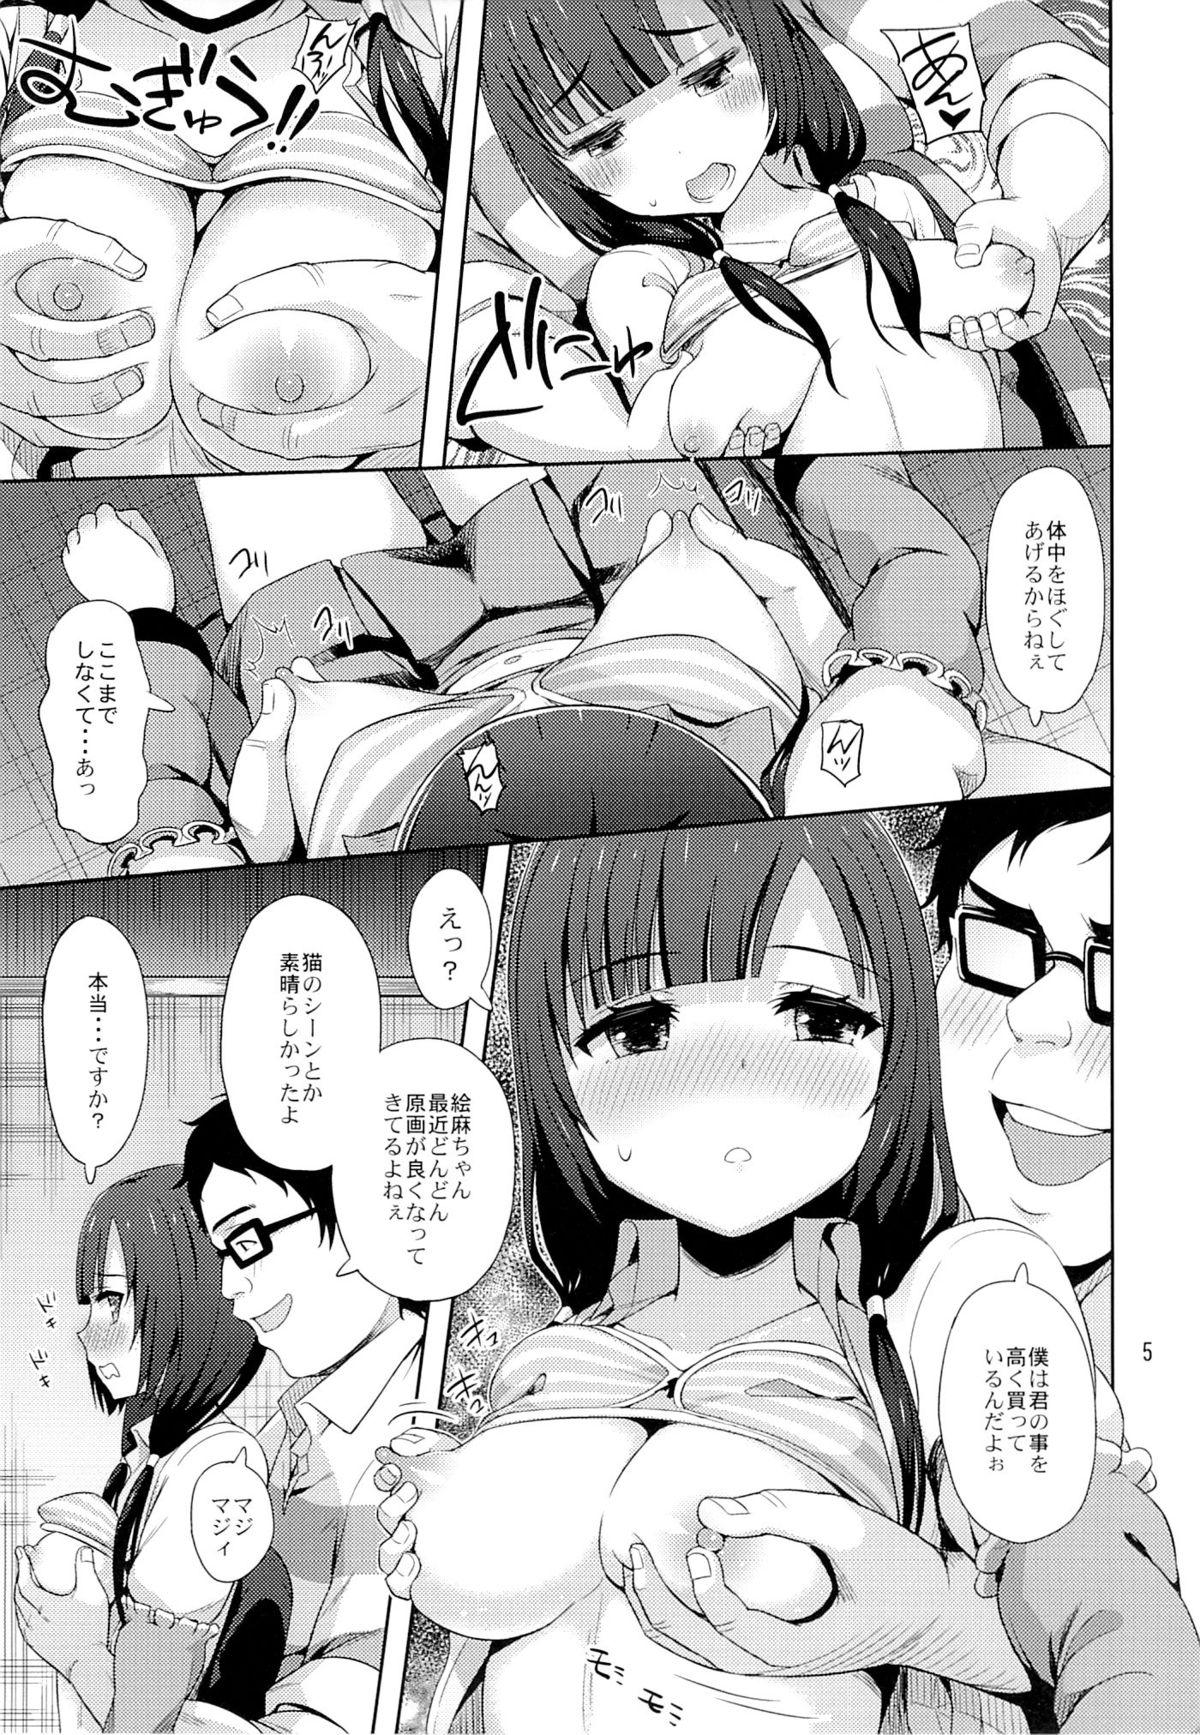 Pussyeating Emabako - Shirobako Pussy - Page 6